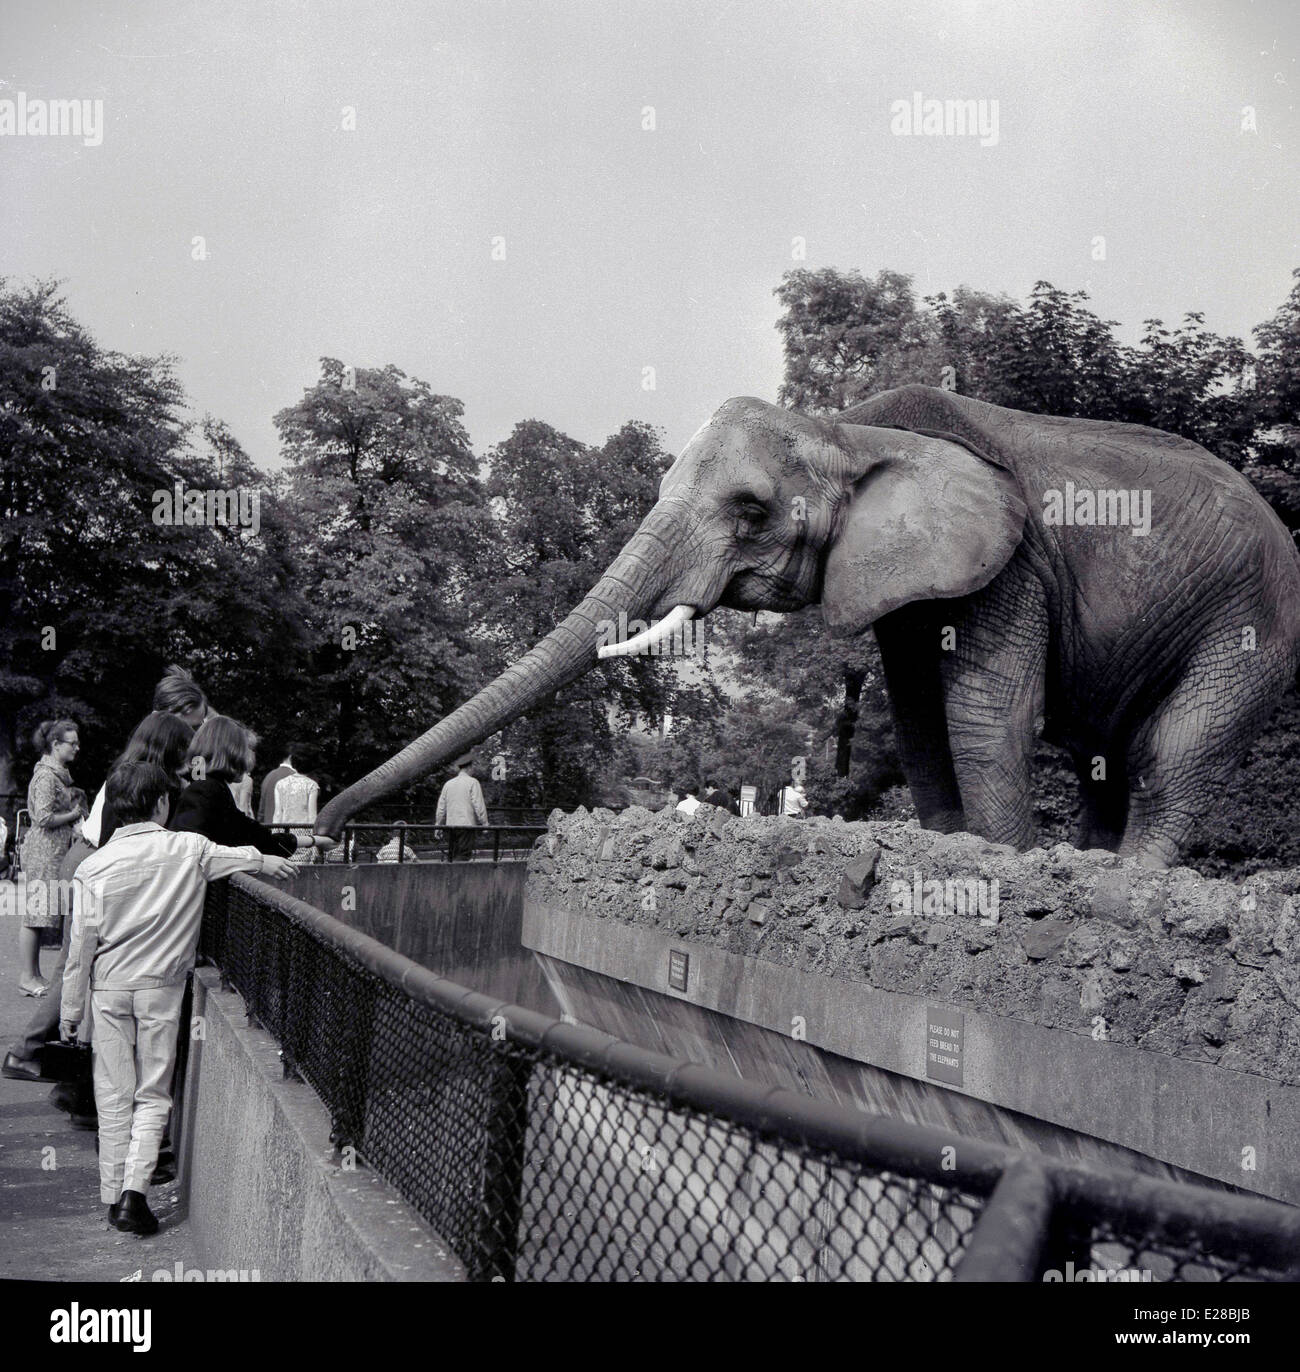 1950s historical picture showing a lady feeding an elephant at ZSL London Zoo, Regent's Park. England. The elephants first came to the zoo in 1831 and visitors could then ride them, but they left in 2001 going to Whipsnade Wild Animal Park, Bedfordshire. London Zoo was opened to the public in 1847 to aid funding, as it had originally opened in 1828 as a place purely for scientific study by the Zoological Society of London (ZSL), a charity committed to the conservation of animals and their habitats. Stock Photo